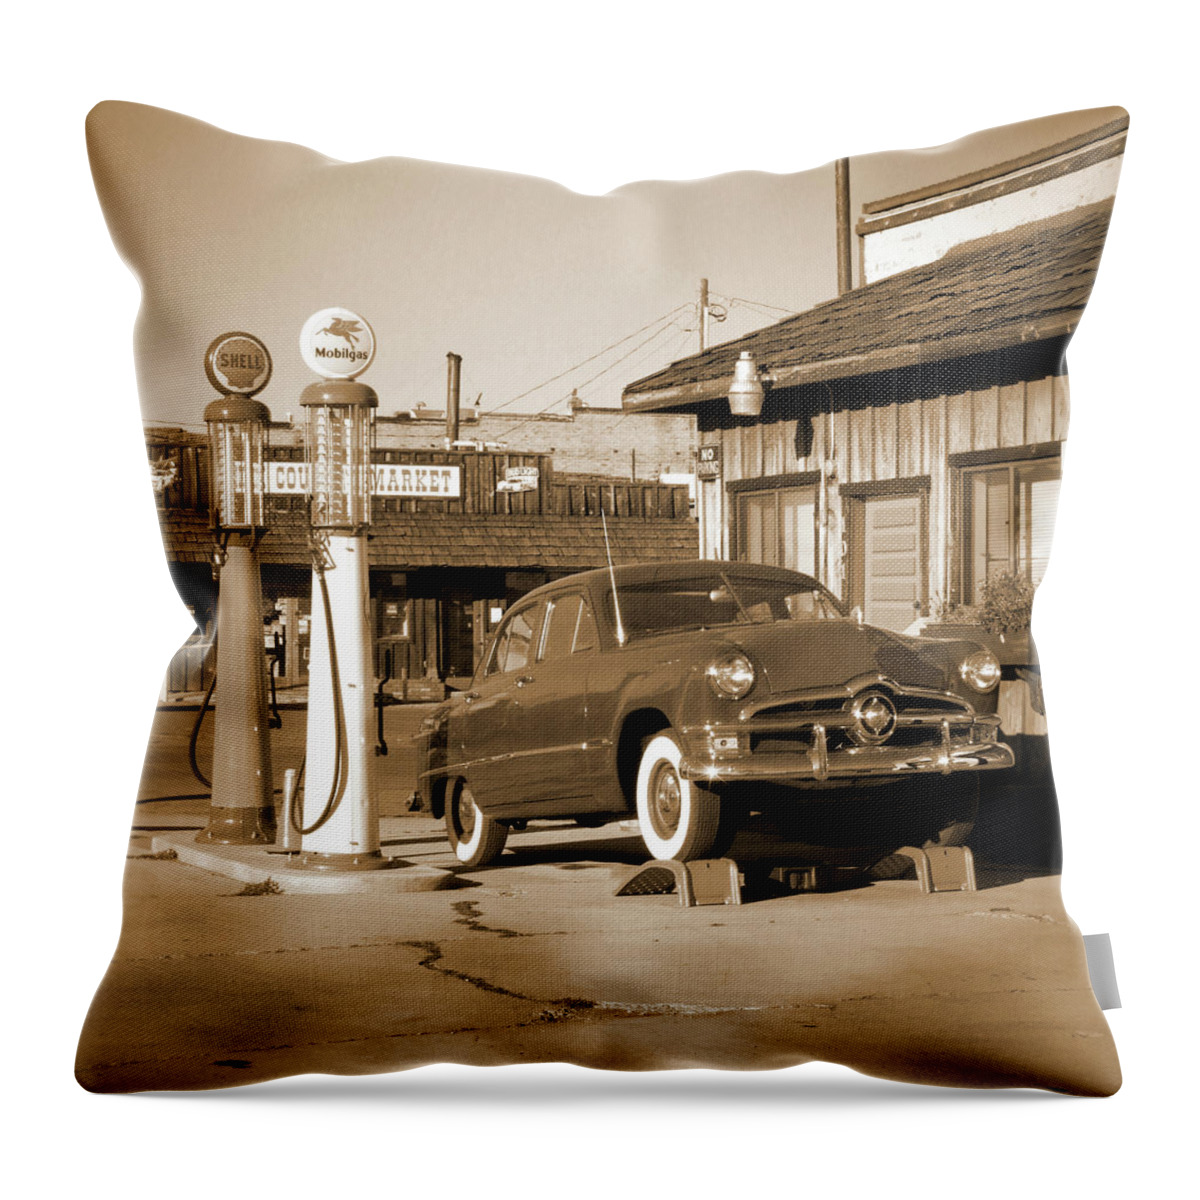 Route 66 Throw Pillow featuring the photograph Route 66 - Old Service Station by Mike McGlothlen